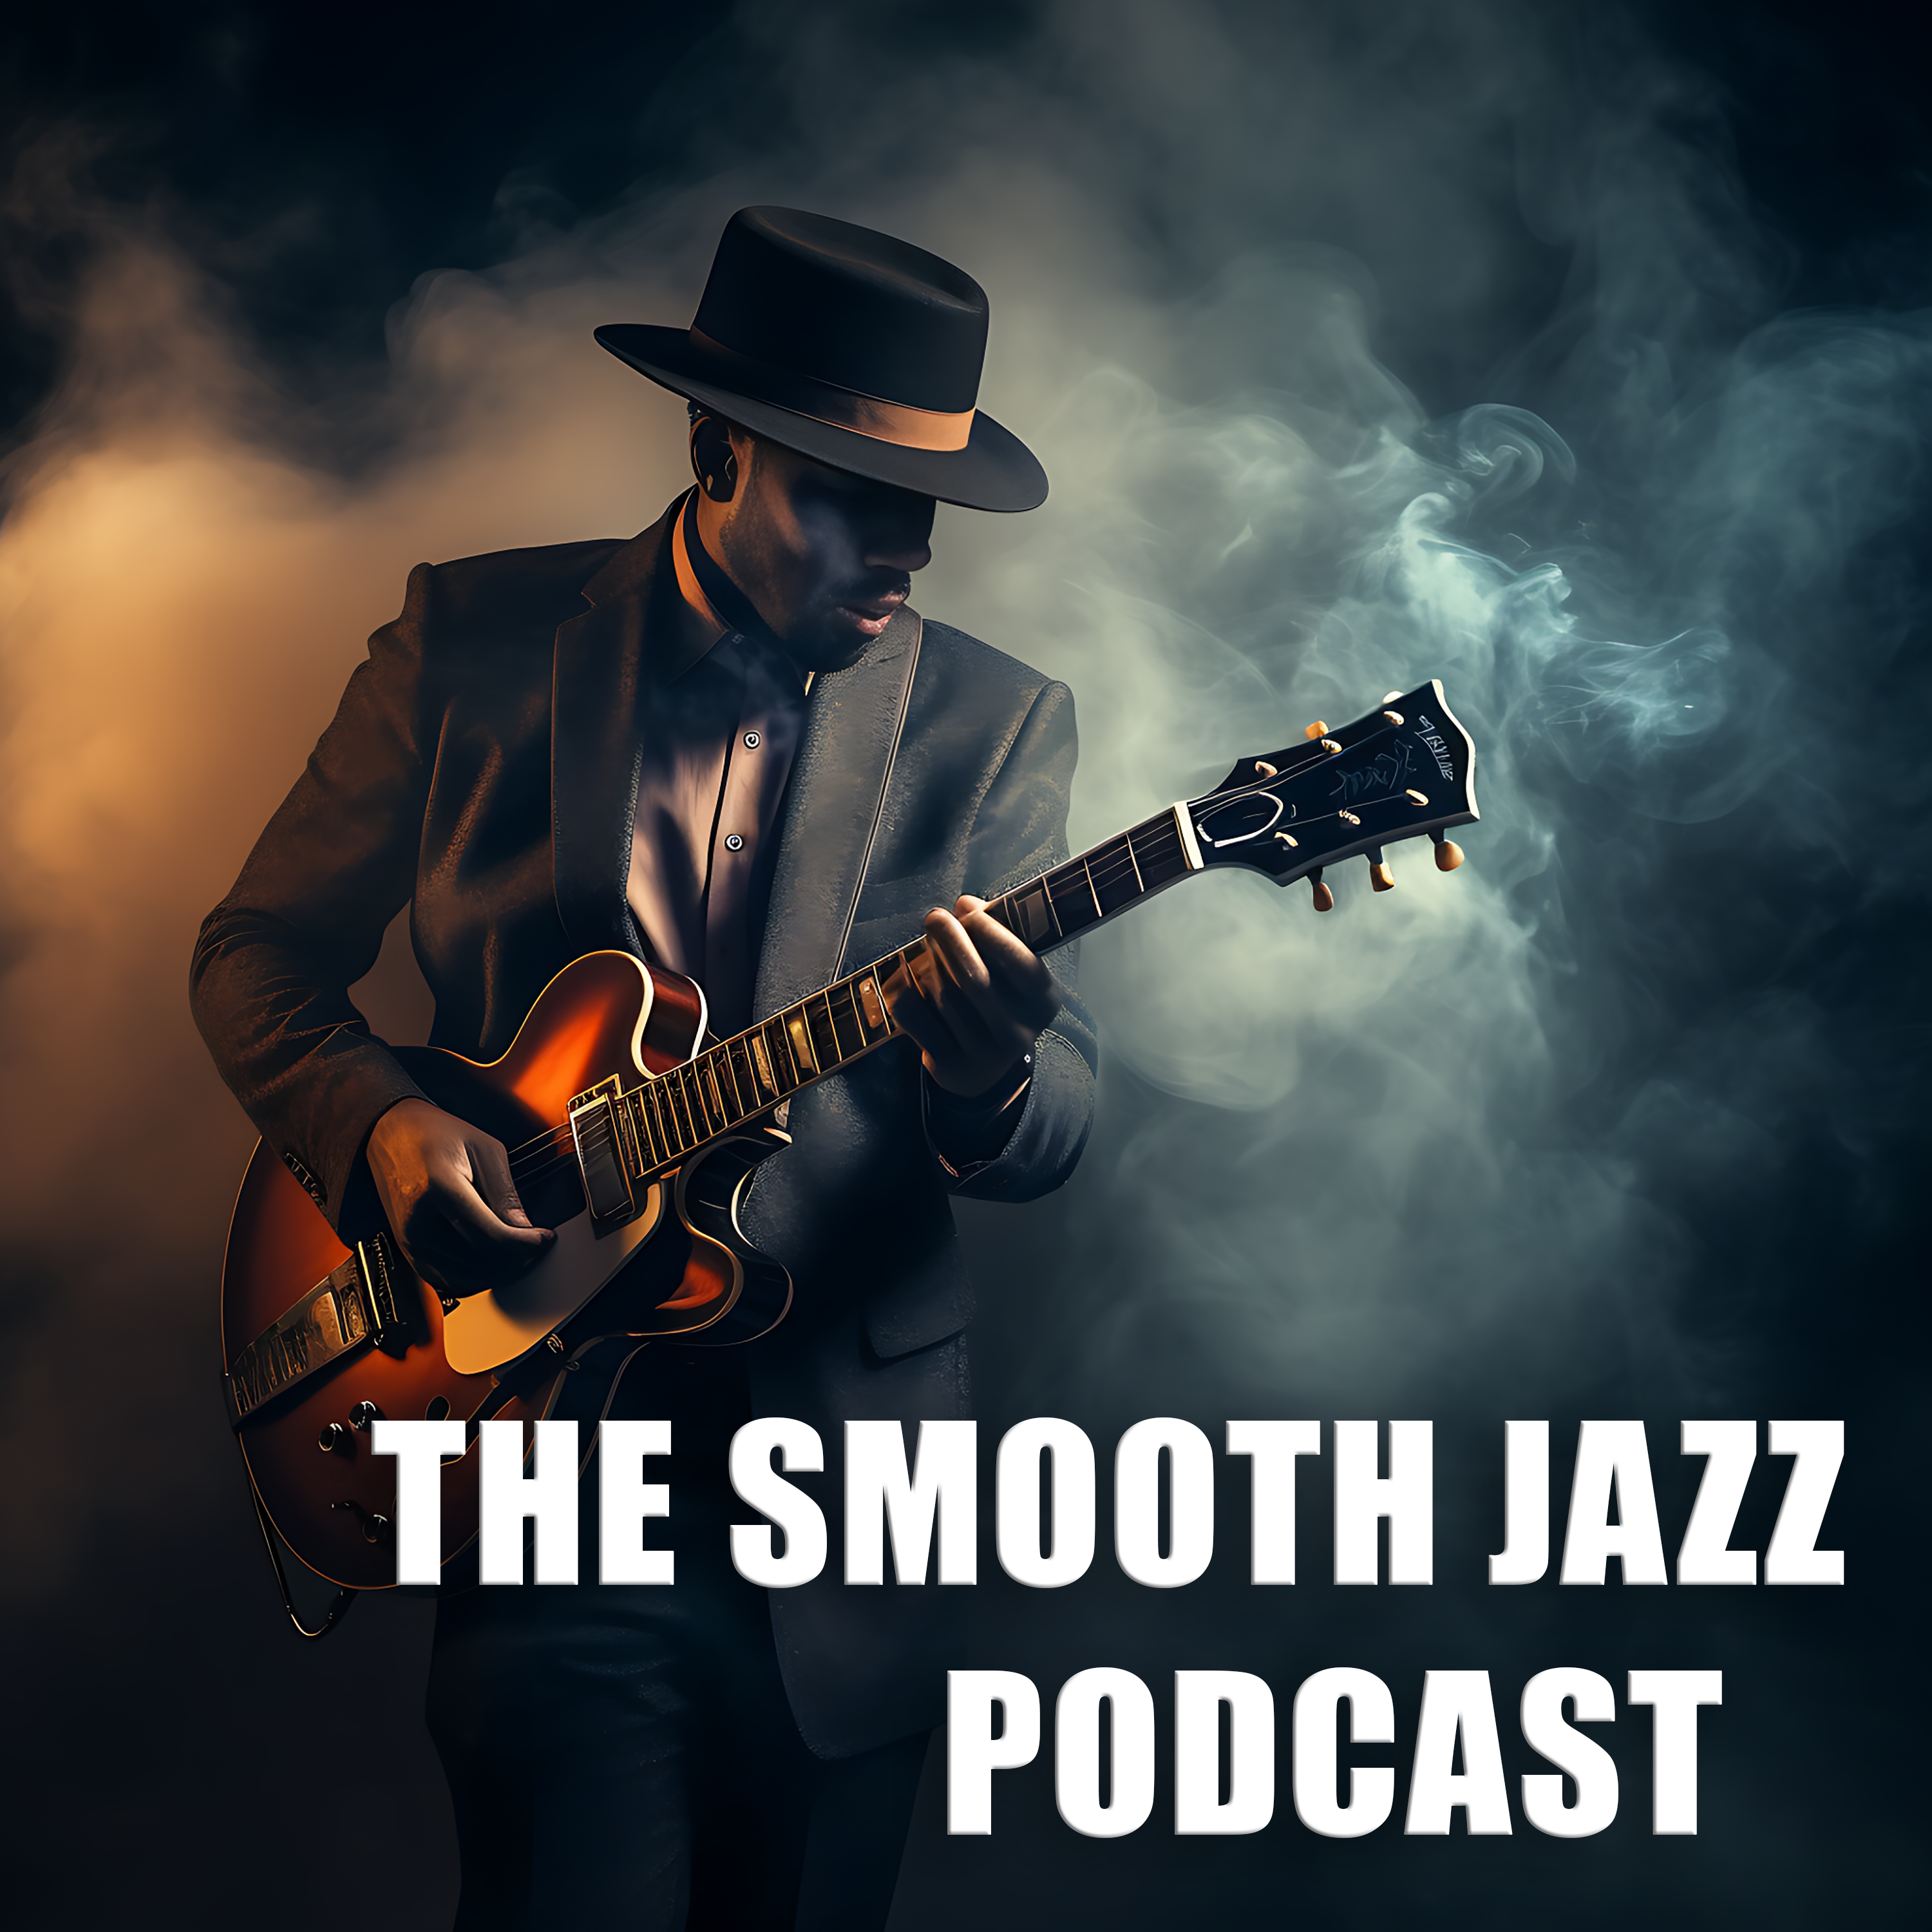 The Smooth Jazz Podcast